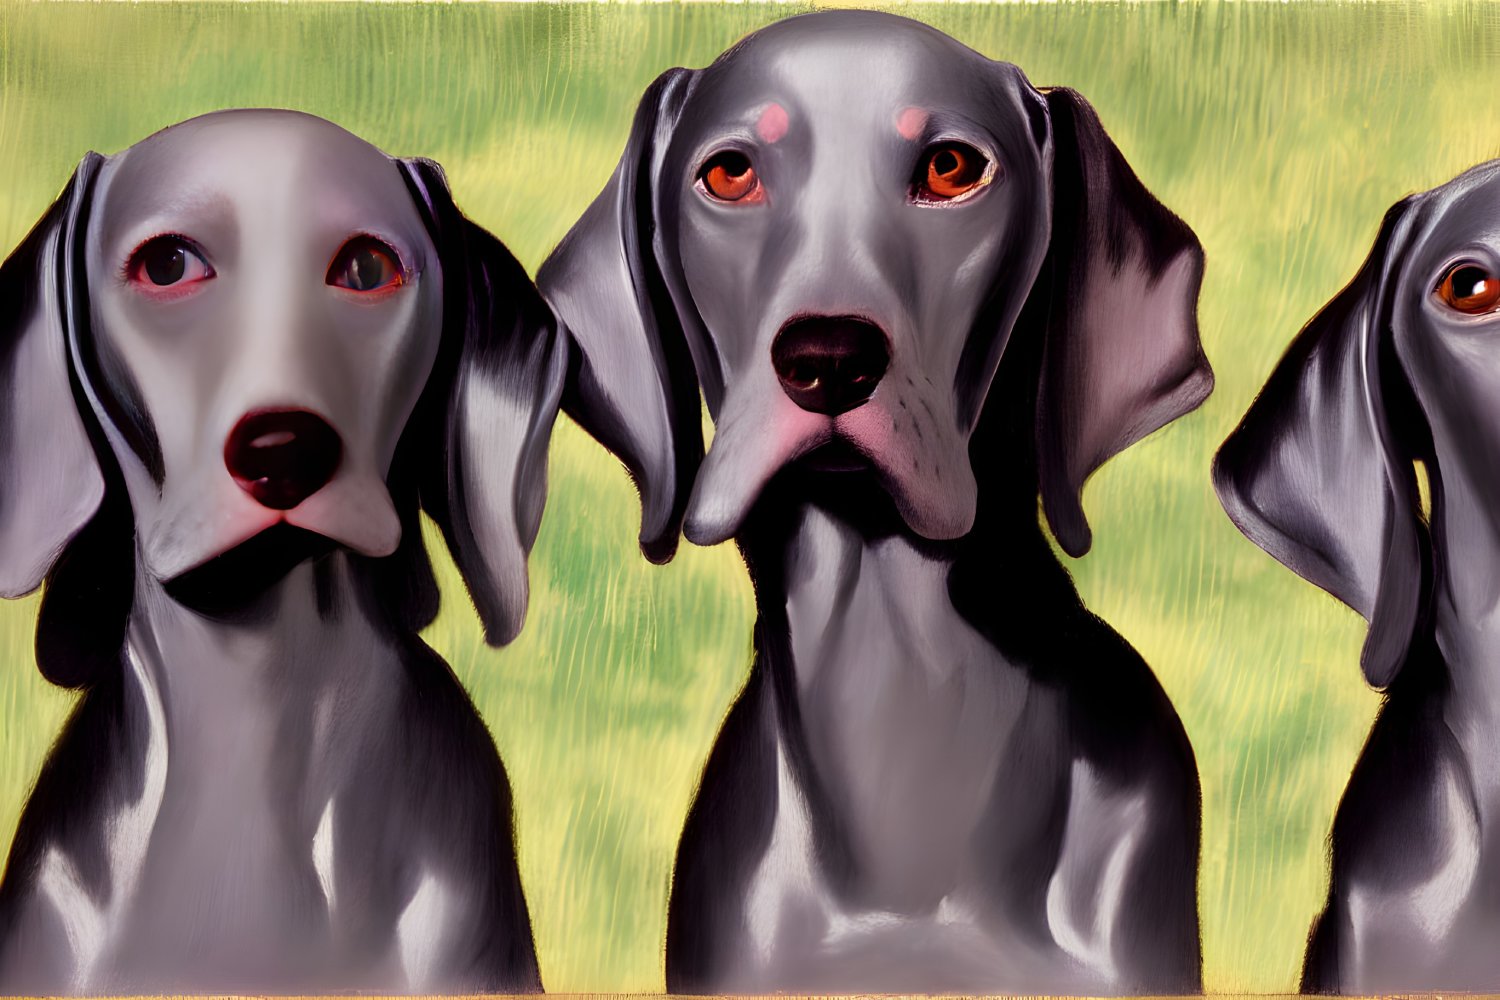 Three Grey Weimaraner Dogs Against Yellow and Green Background